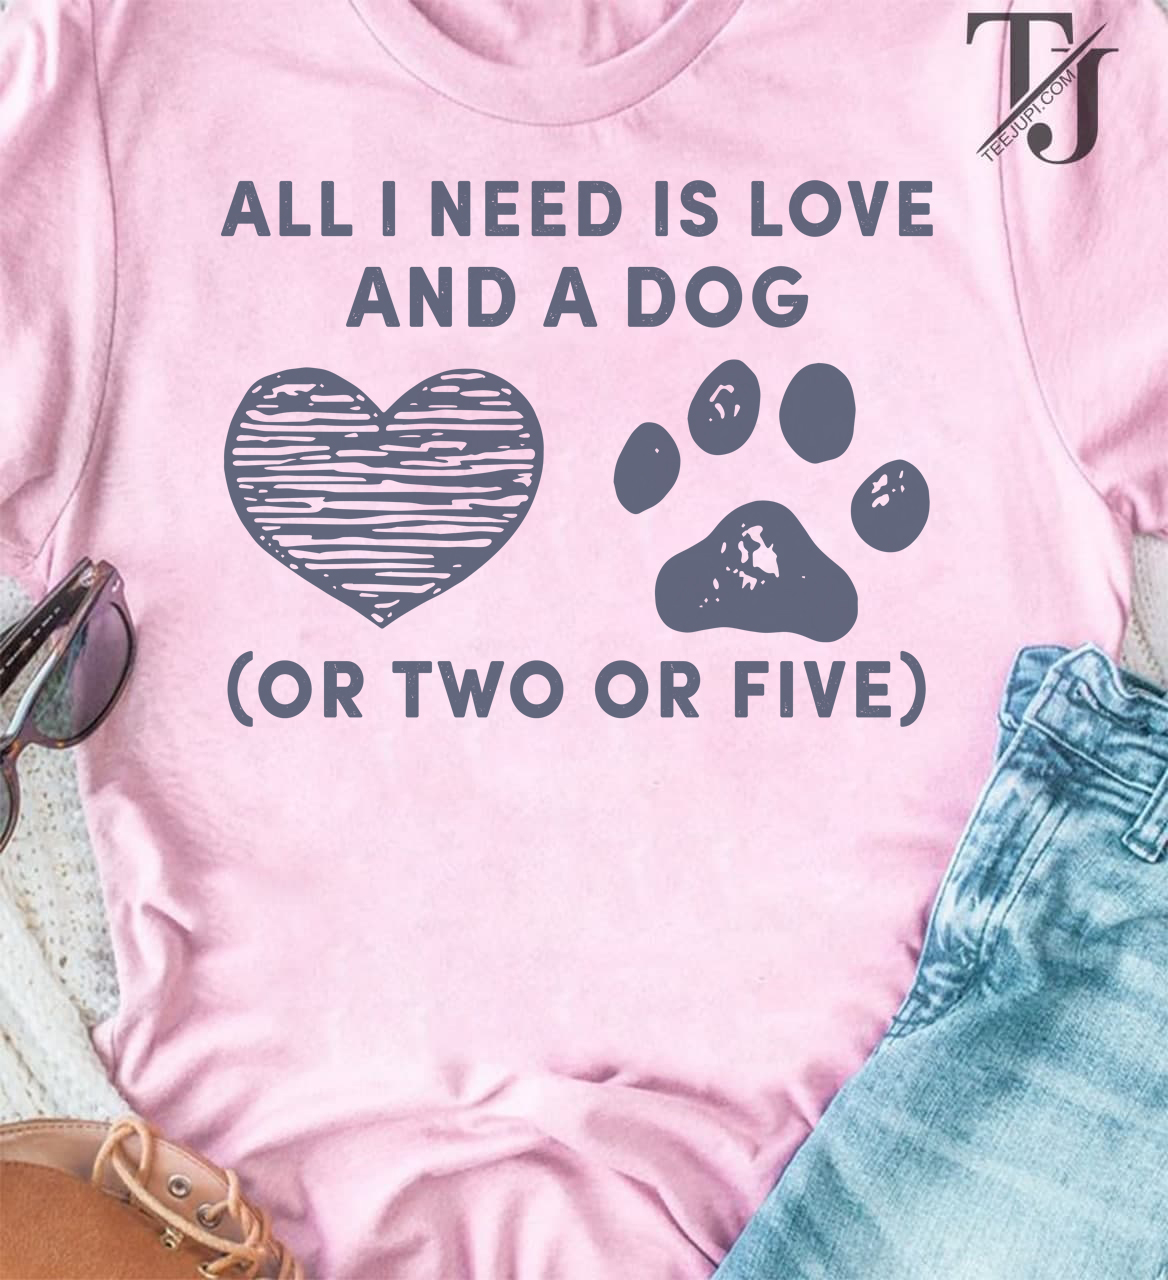 All i need is love and a dog (or two or five)